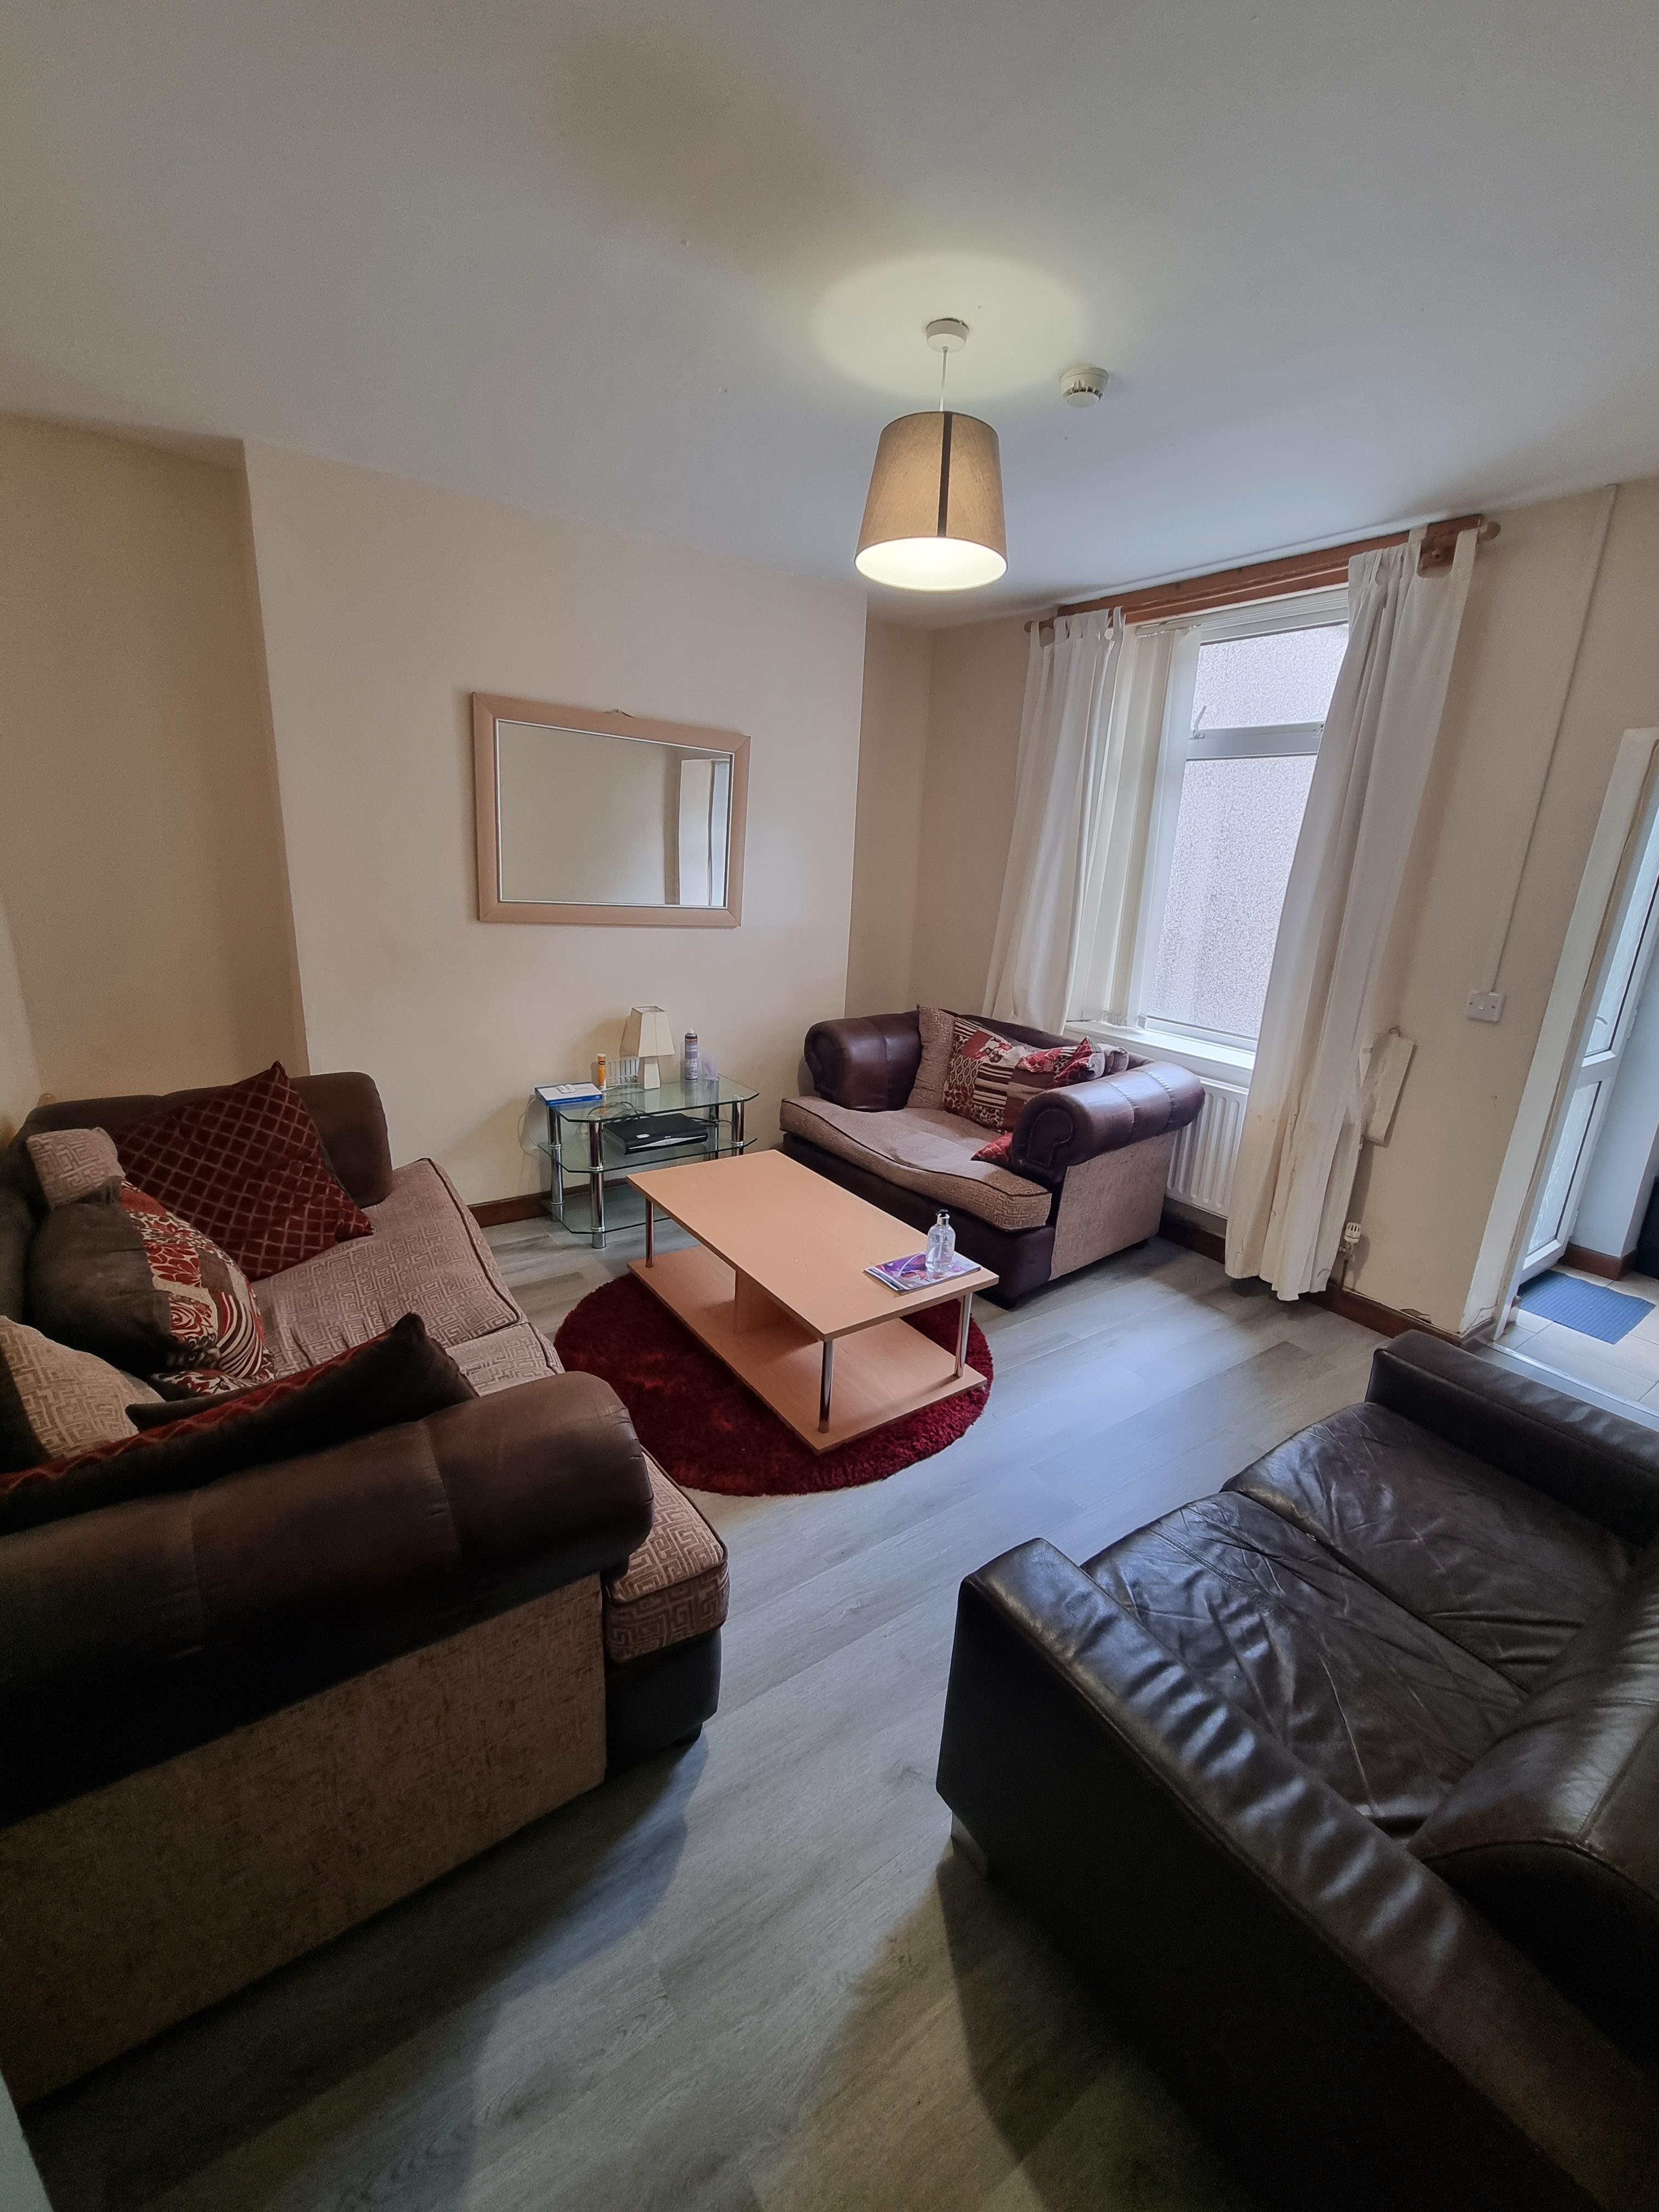 1 bed house / flat share to rent in Wood Road , Treforest   - Property Image 2